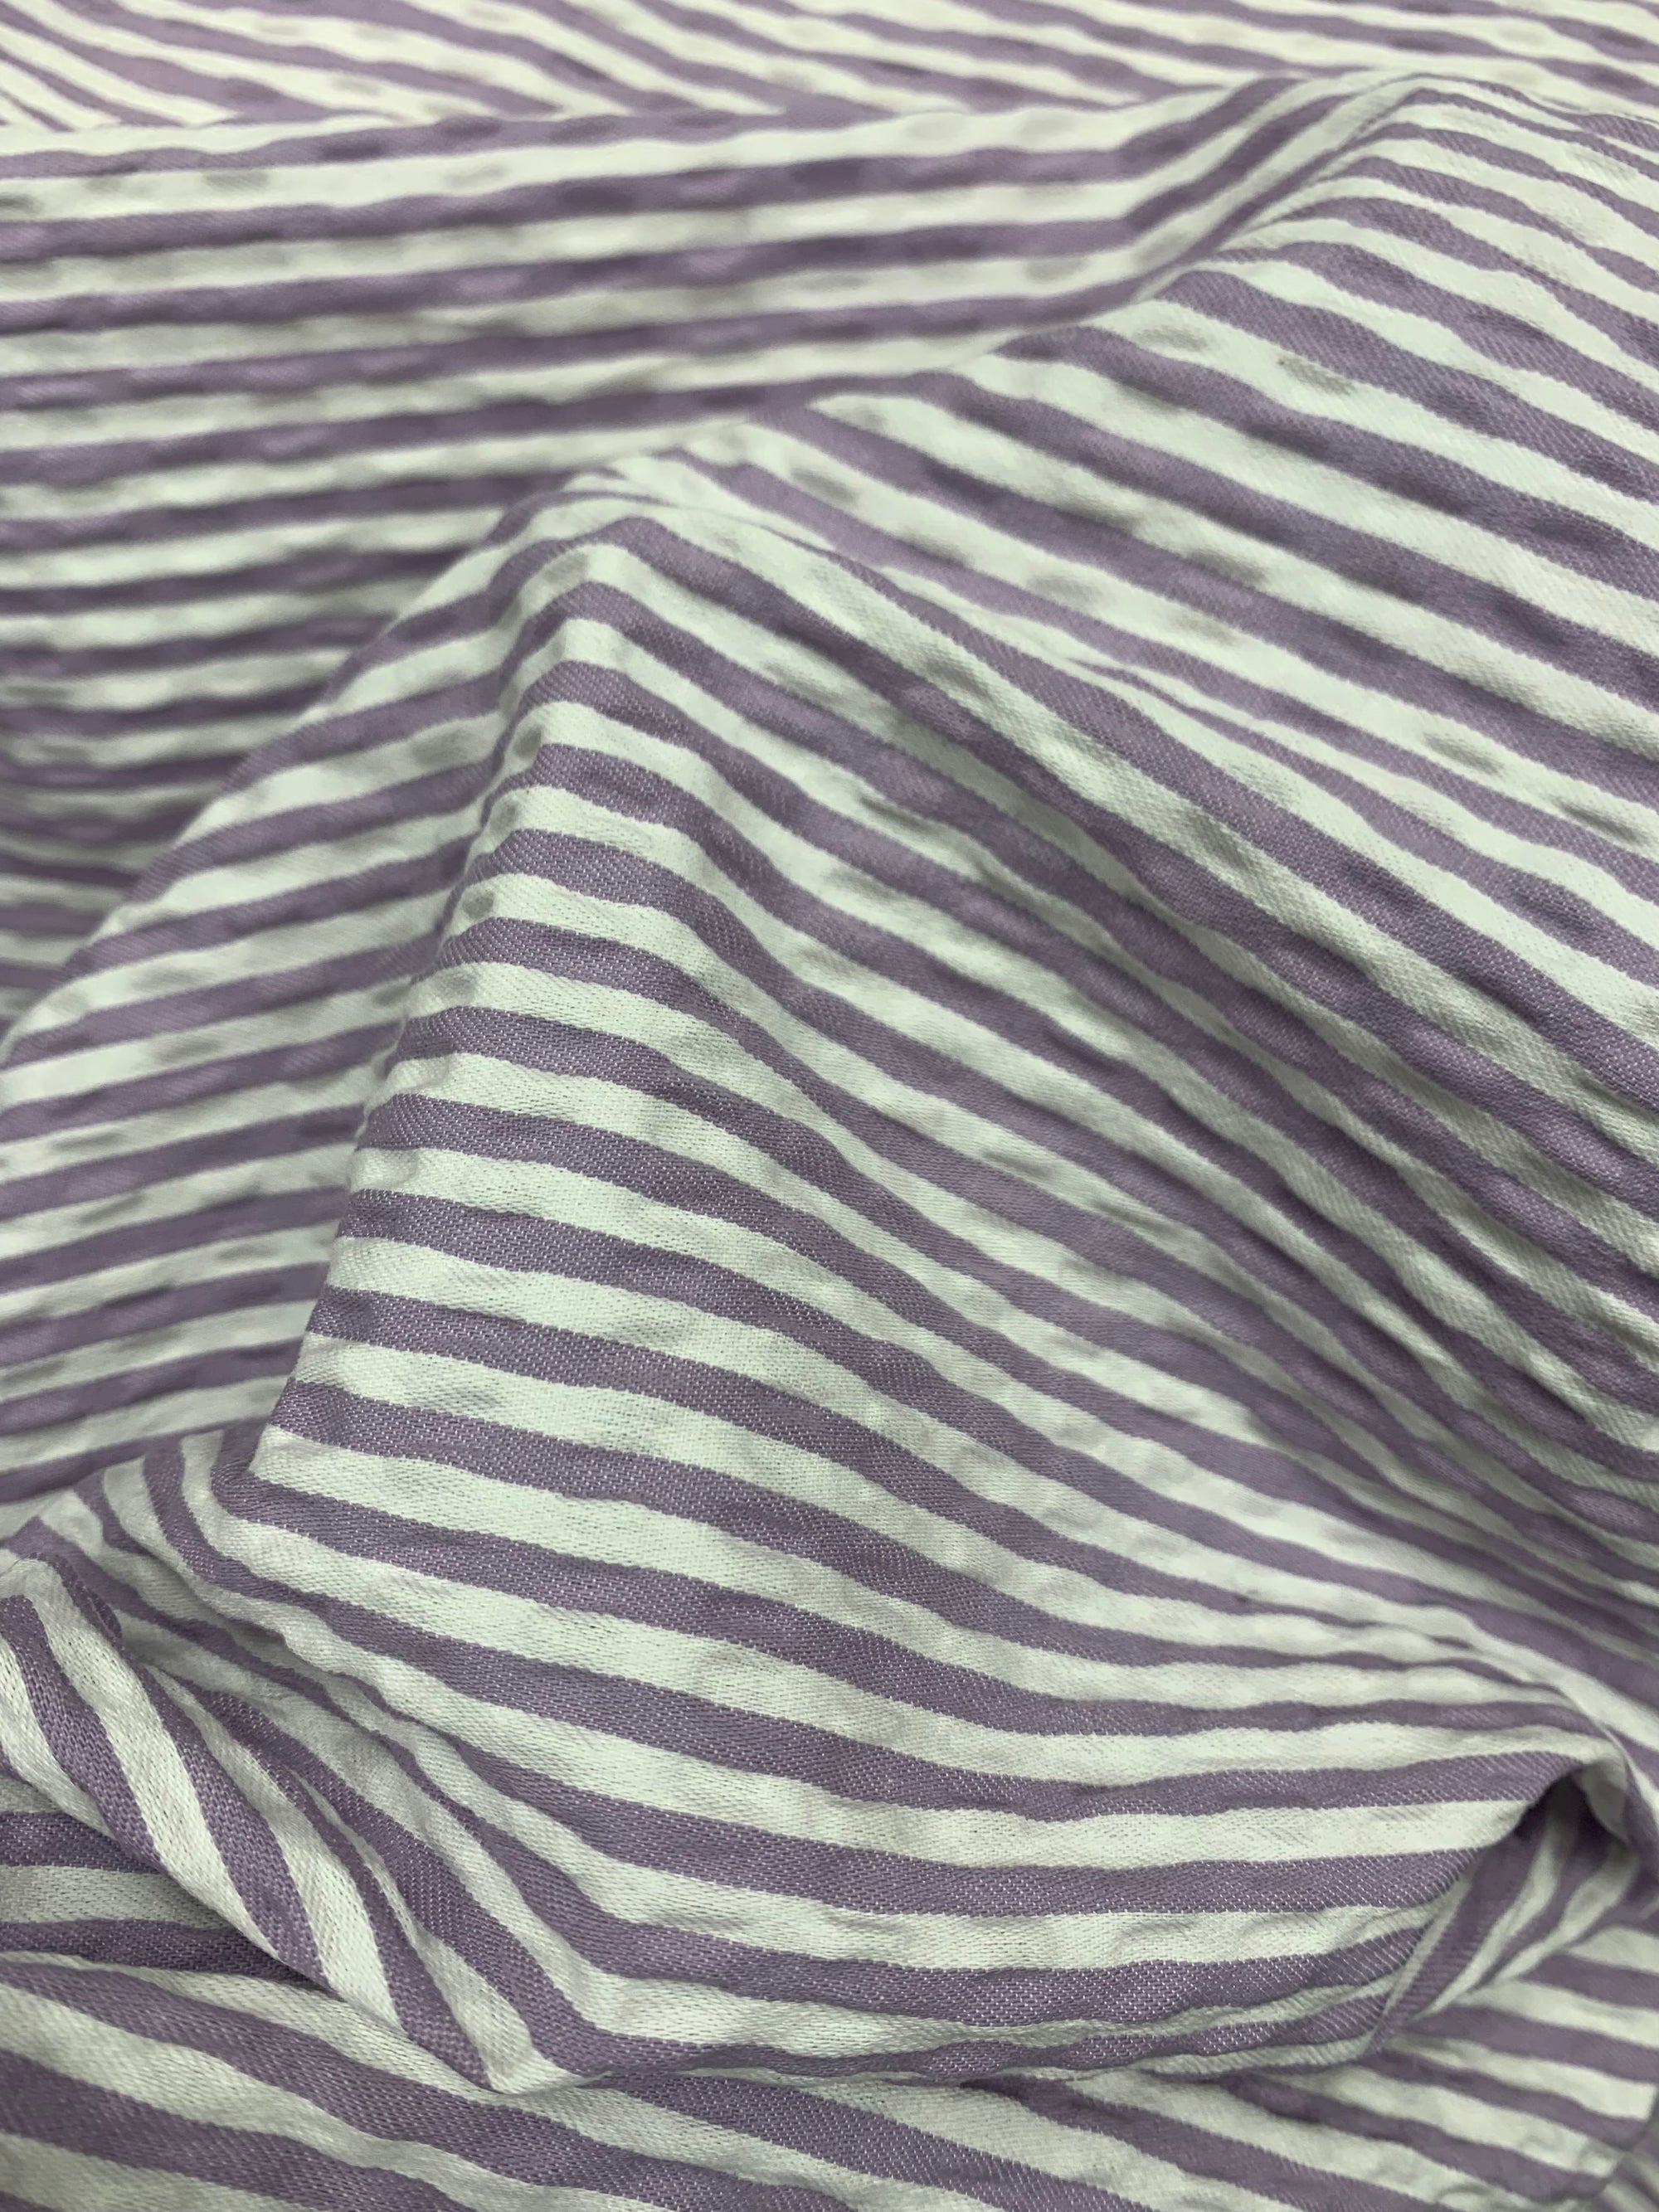 A draped  cotton seersucker fabric in a striped Lilac and White horizontally.